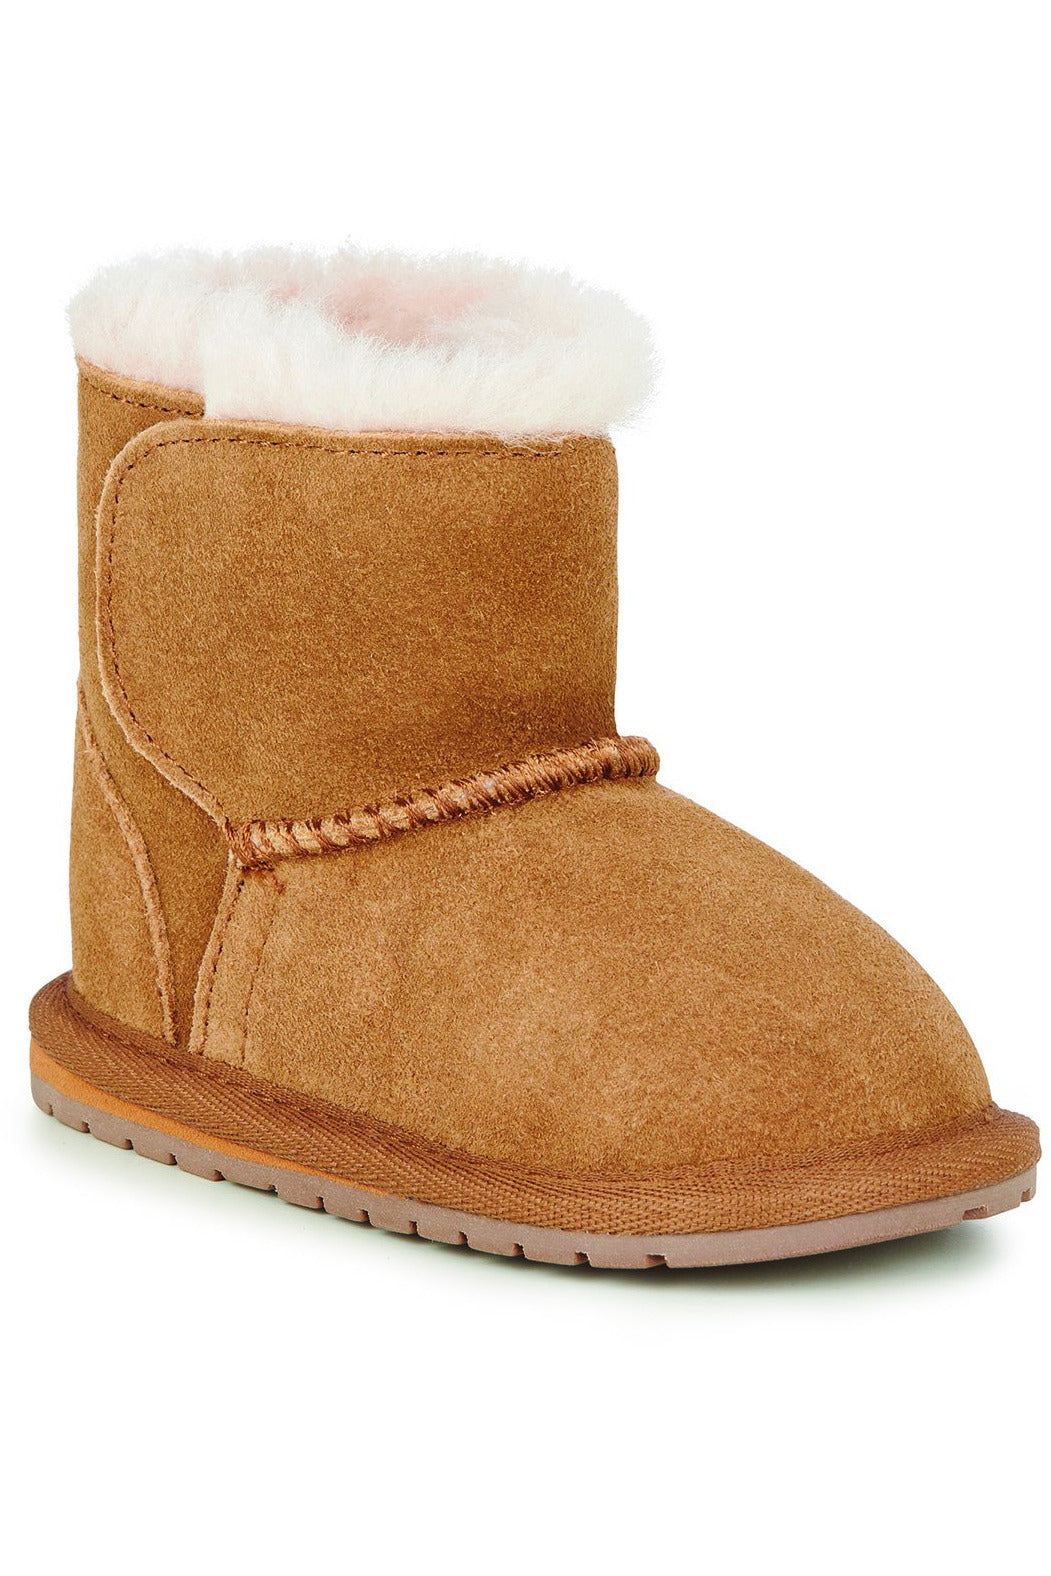 Toddle Boot - Chestnut